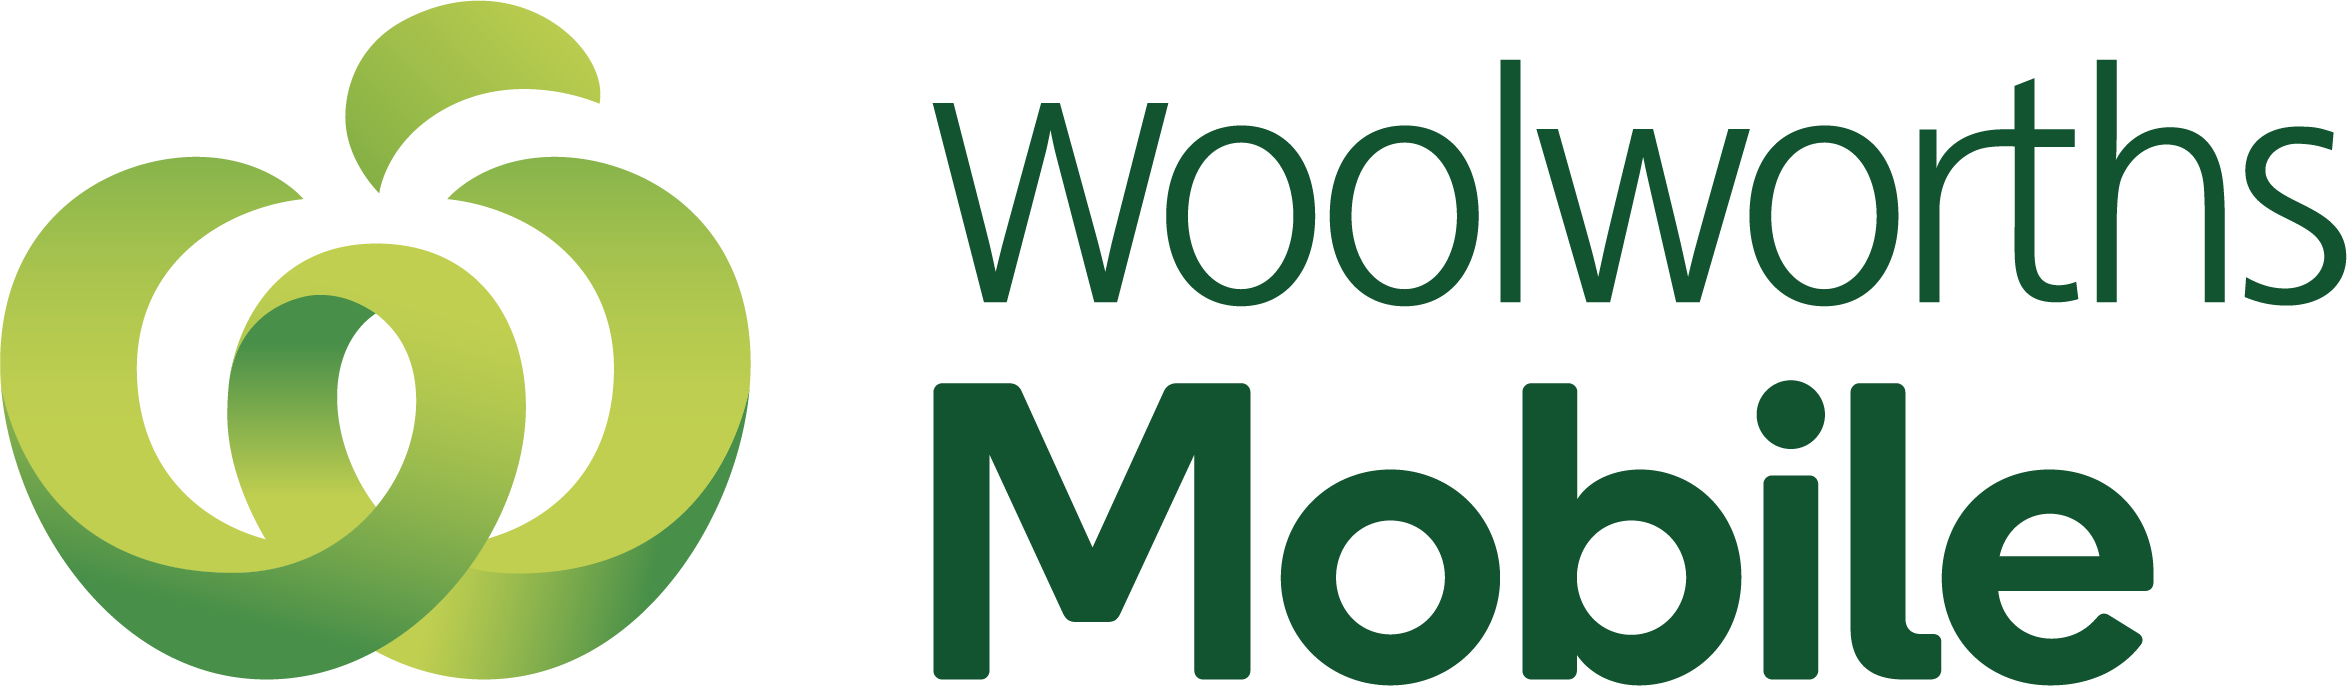 Mobile Phone Plans And Sim Plans | Woolworths Mobile